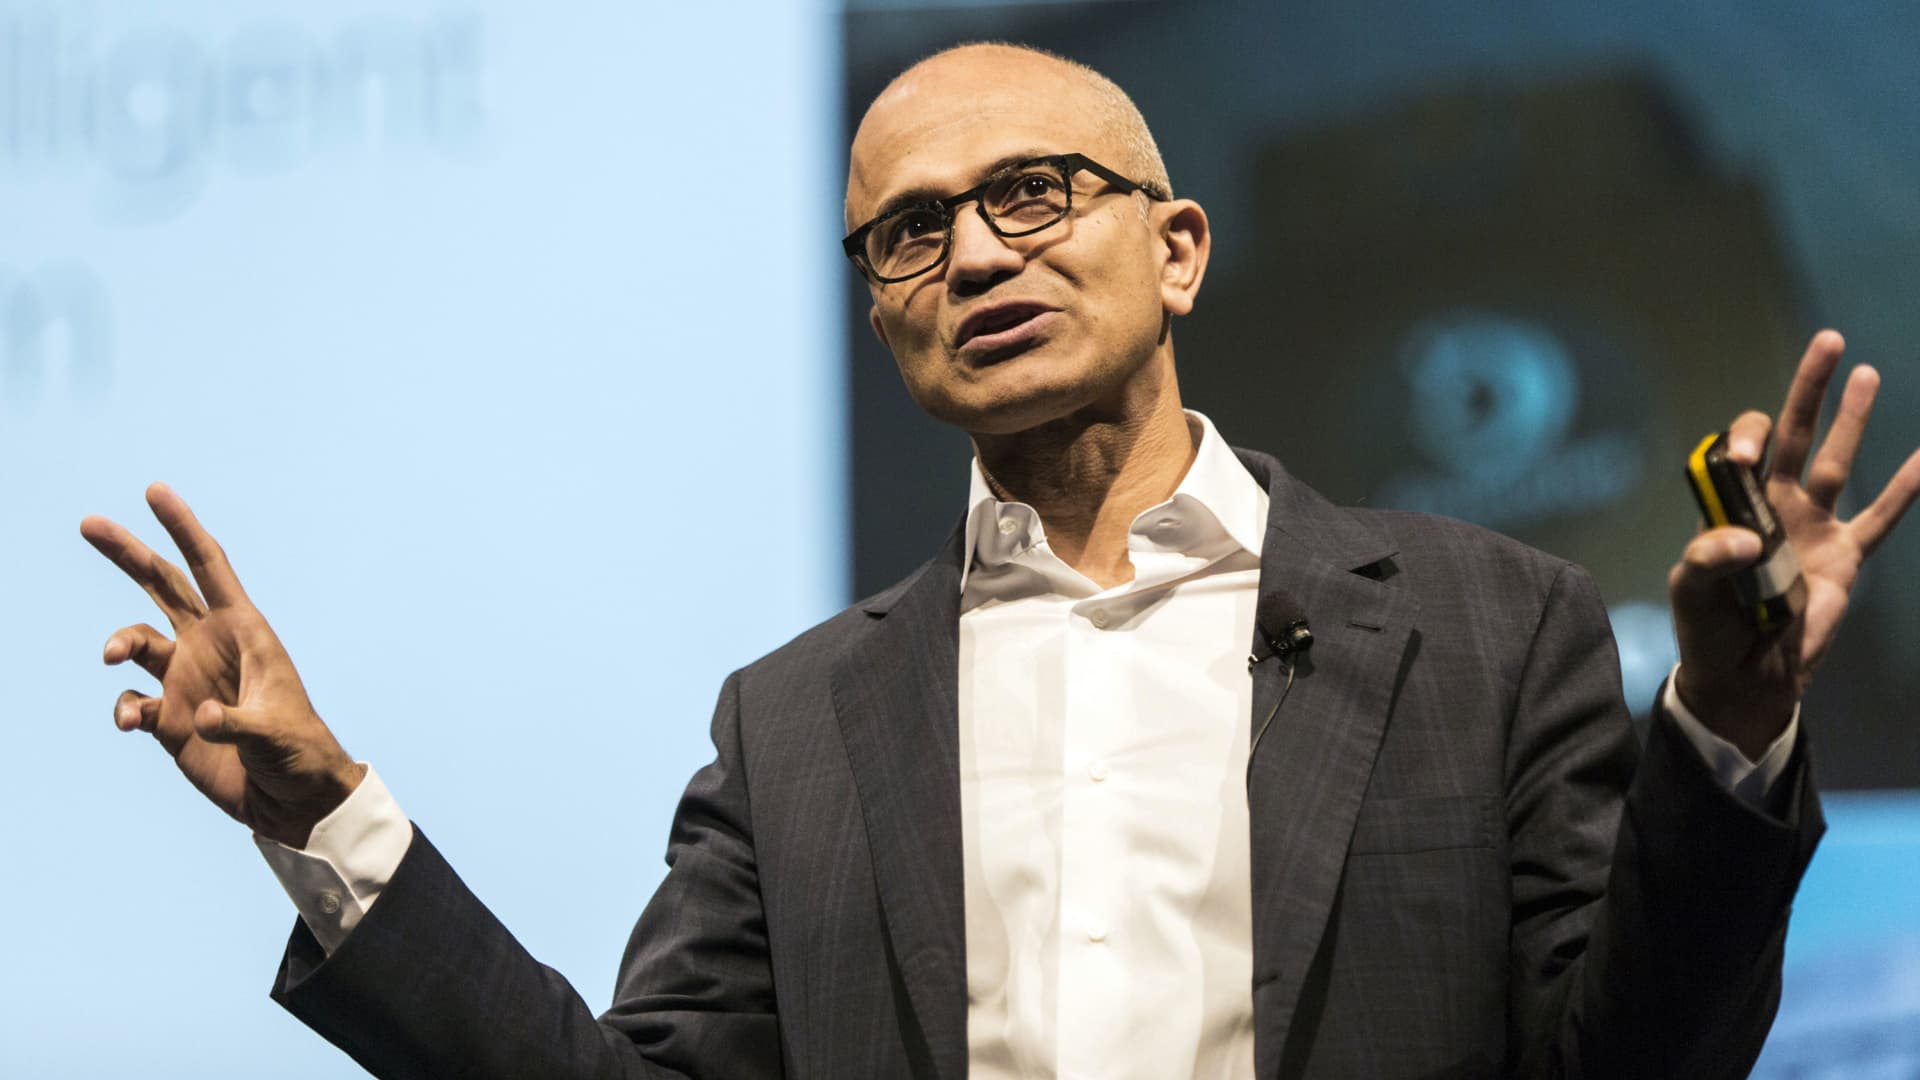 Satya Nadella, chief executive officer of Microsoft Corp., speaks during the opening keynote session at the Microsoft Developer Day in Singapore, on Friday, May 27, 2016. Microsoft has all but abandoned the smartphone game. The company said Wednesday that it will axe as many as 1,850 jobs, many of them in Finland -- home base of the handset business Microsoft acquired two years ago from Nokia Oyj.